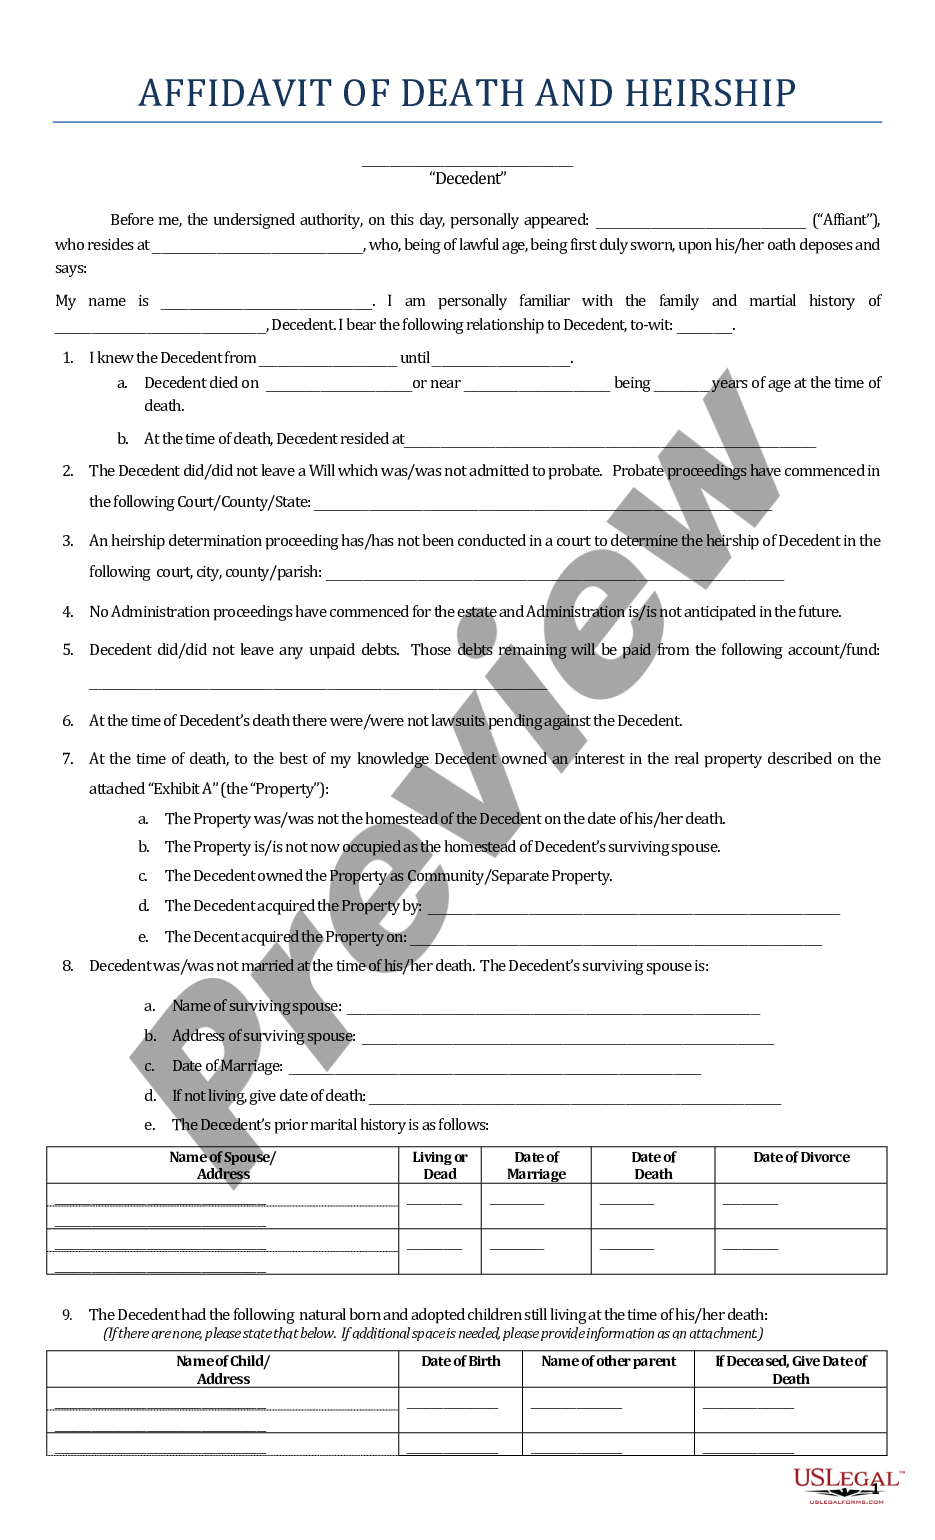 Affidavit Of Death And Heirship Us Legal Forms 4097